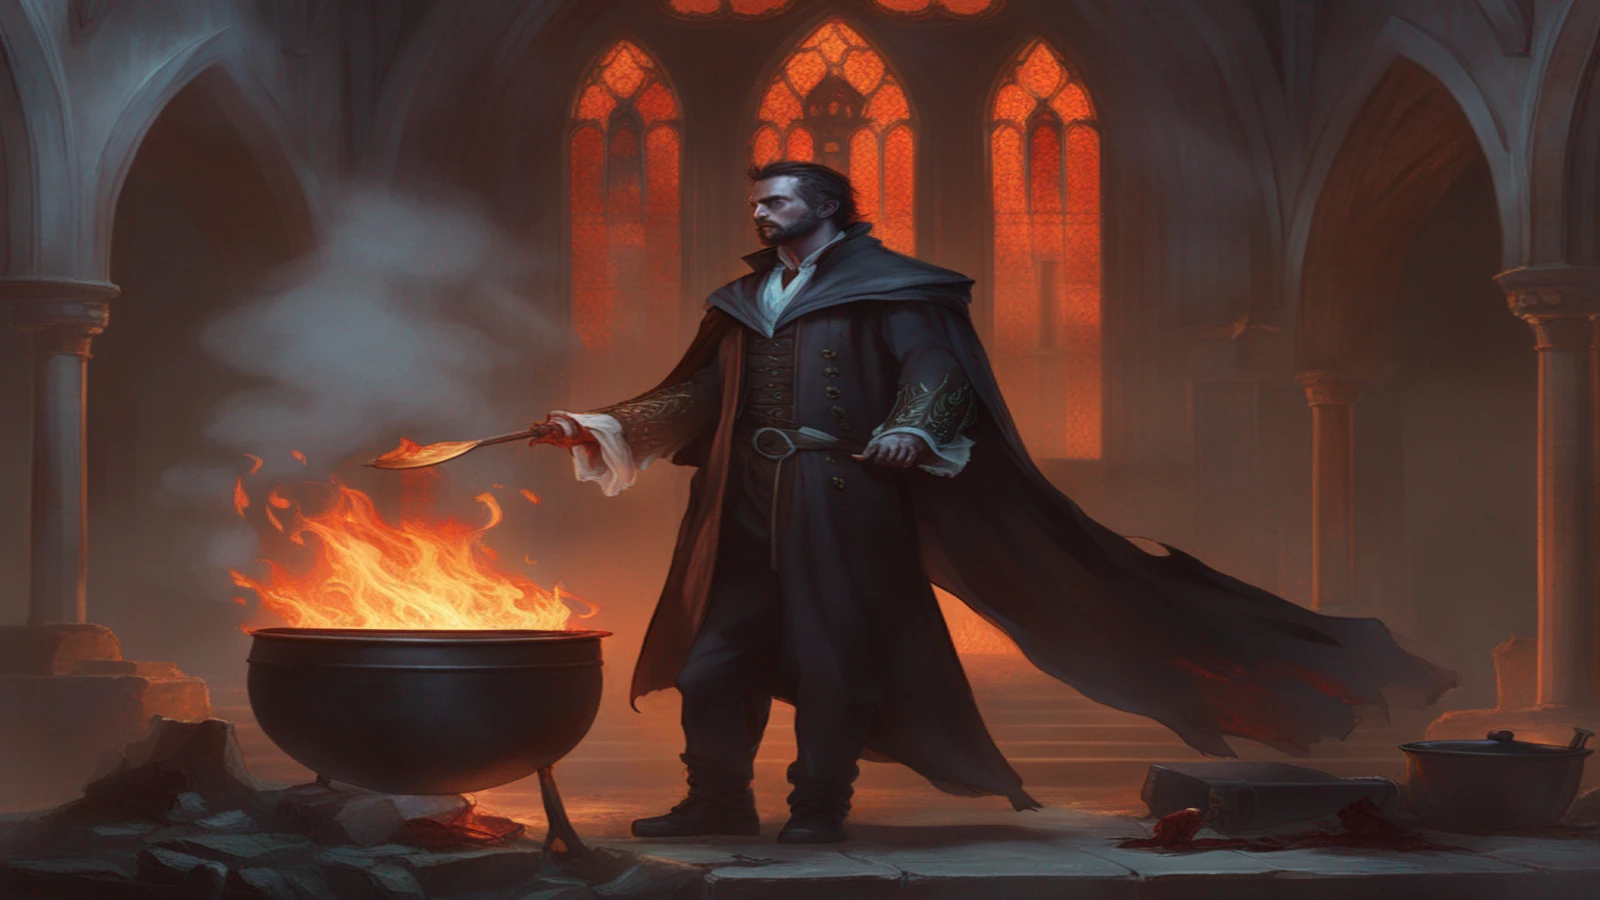 a_middleaged_male_vampire_conjuring_up_a_demon_holding_a_pan_of_hot_fires_at_a_disused_ruined_church_by_the_coast_in_England_